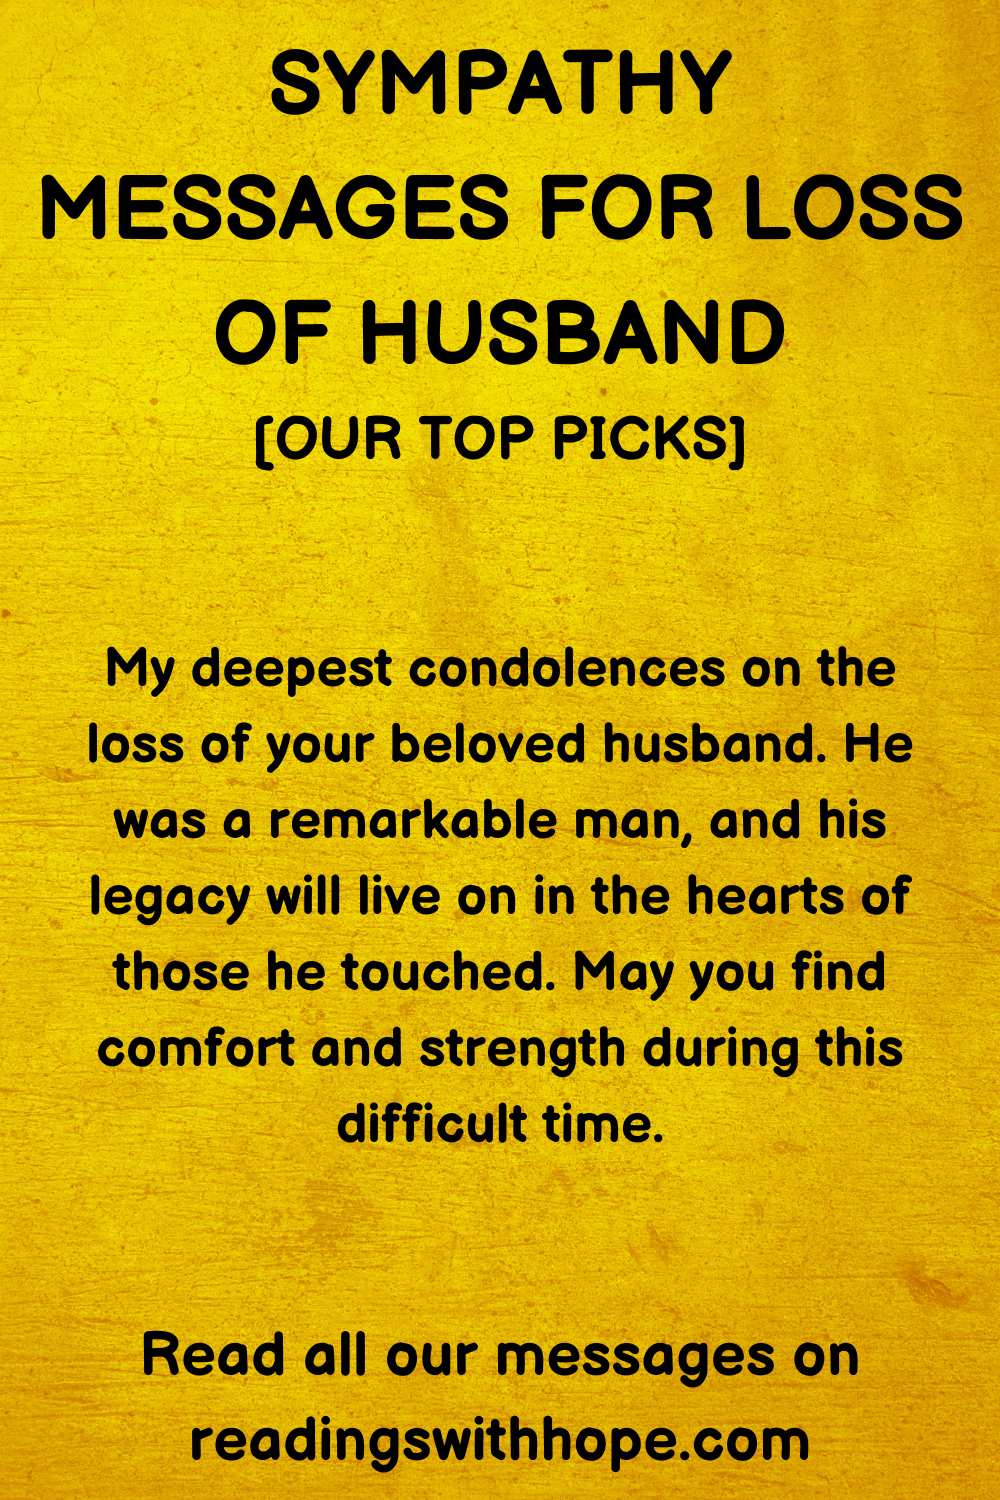 60 Condolences and Sympathy Messages For Loss of Husband